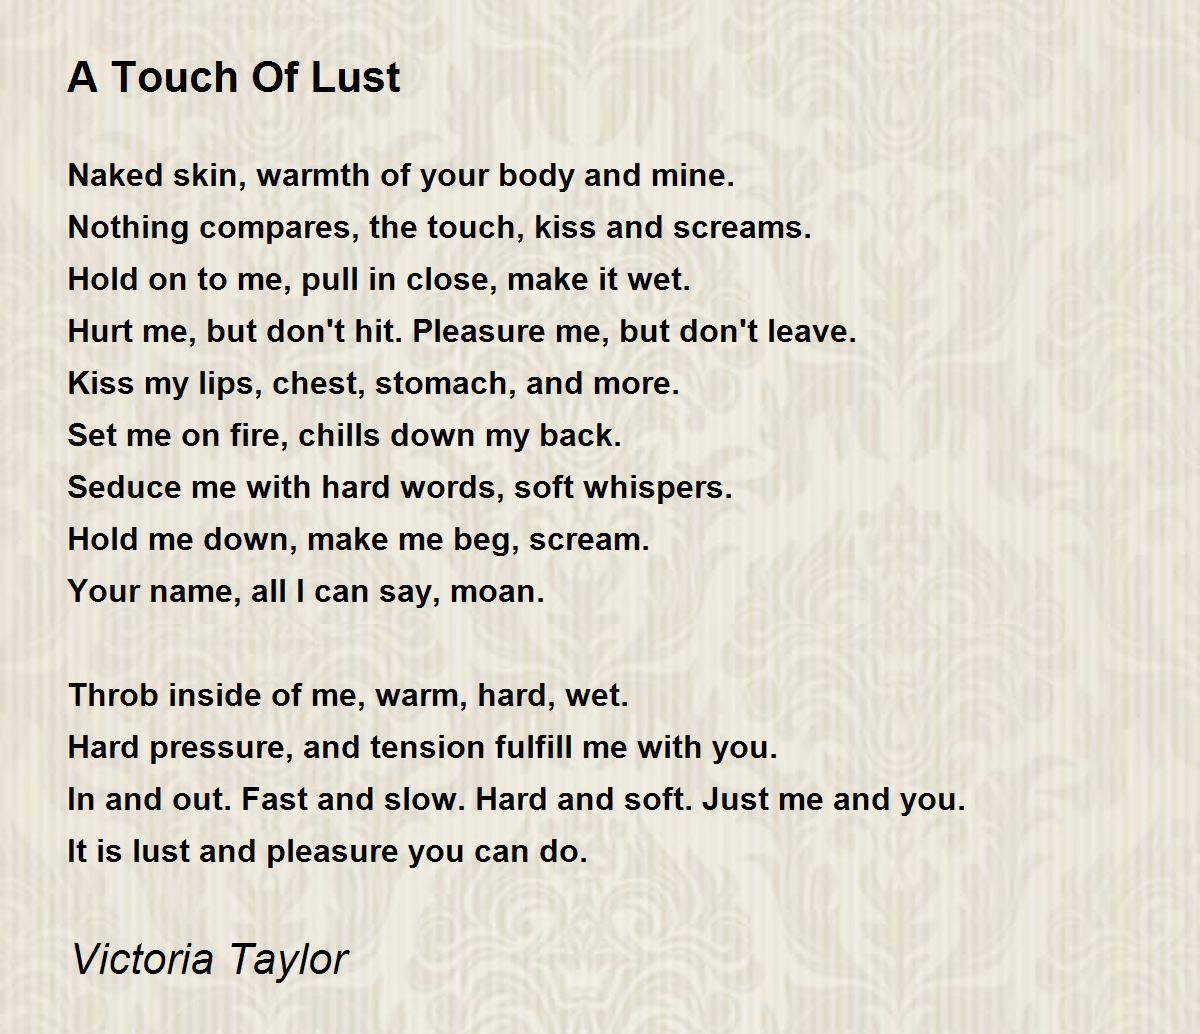 A touch of lust